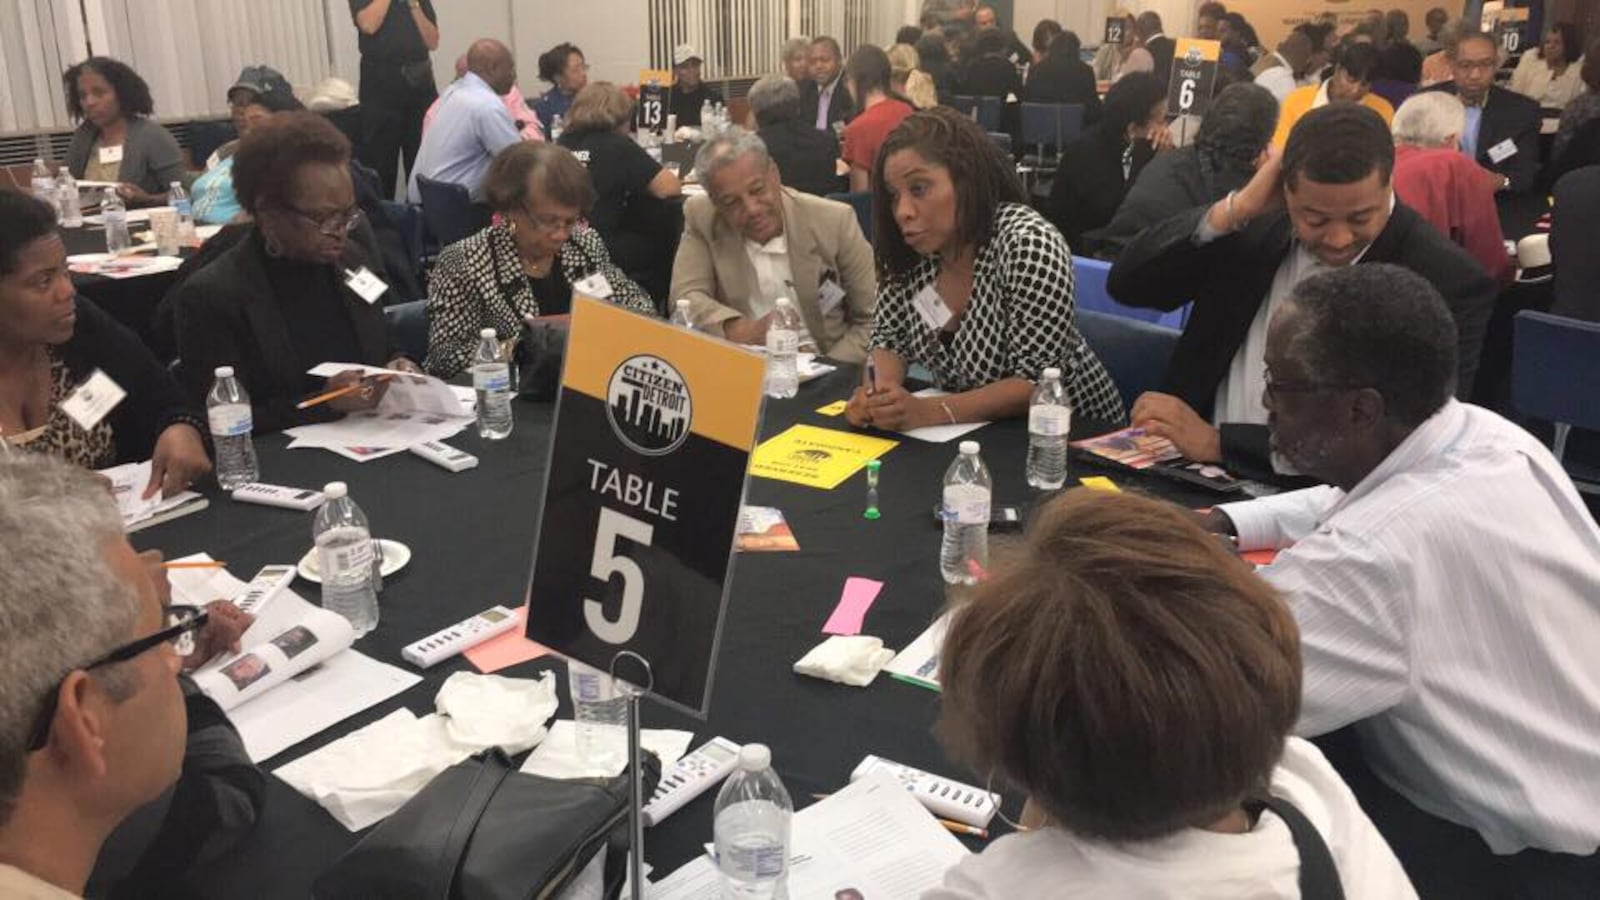 Attendees at last night's CitizenDetroit School Board Candidate Forum hear from candidates Sonya Mays and Ryan Mack in a "speed dating round" on how they would ensure transparency and robust community engagement if elected. (Courtesy CitizenDetroit)